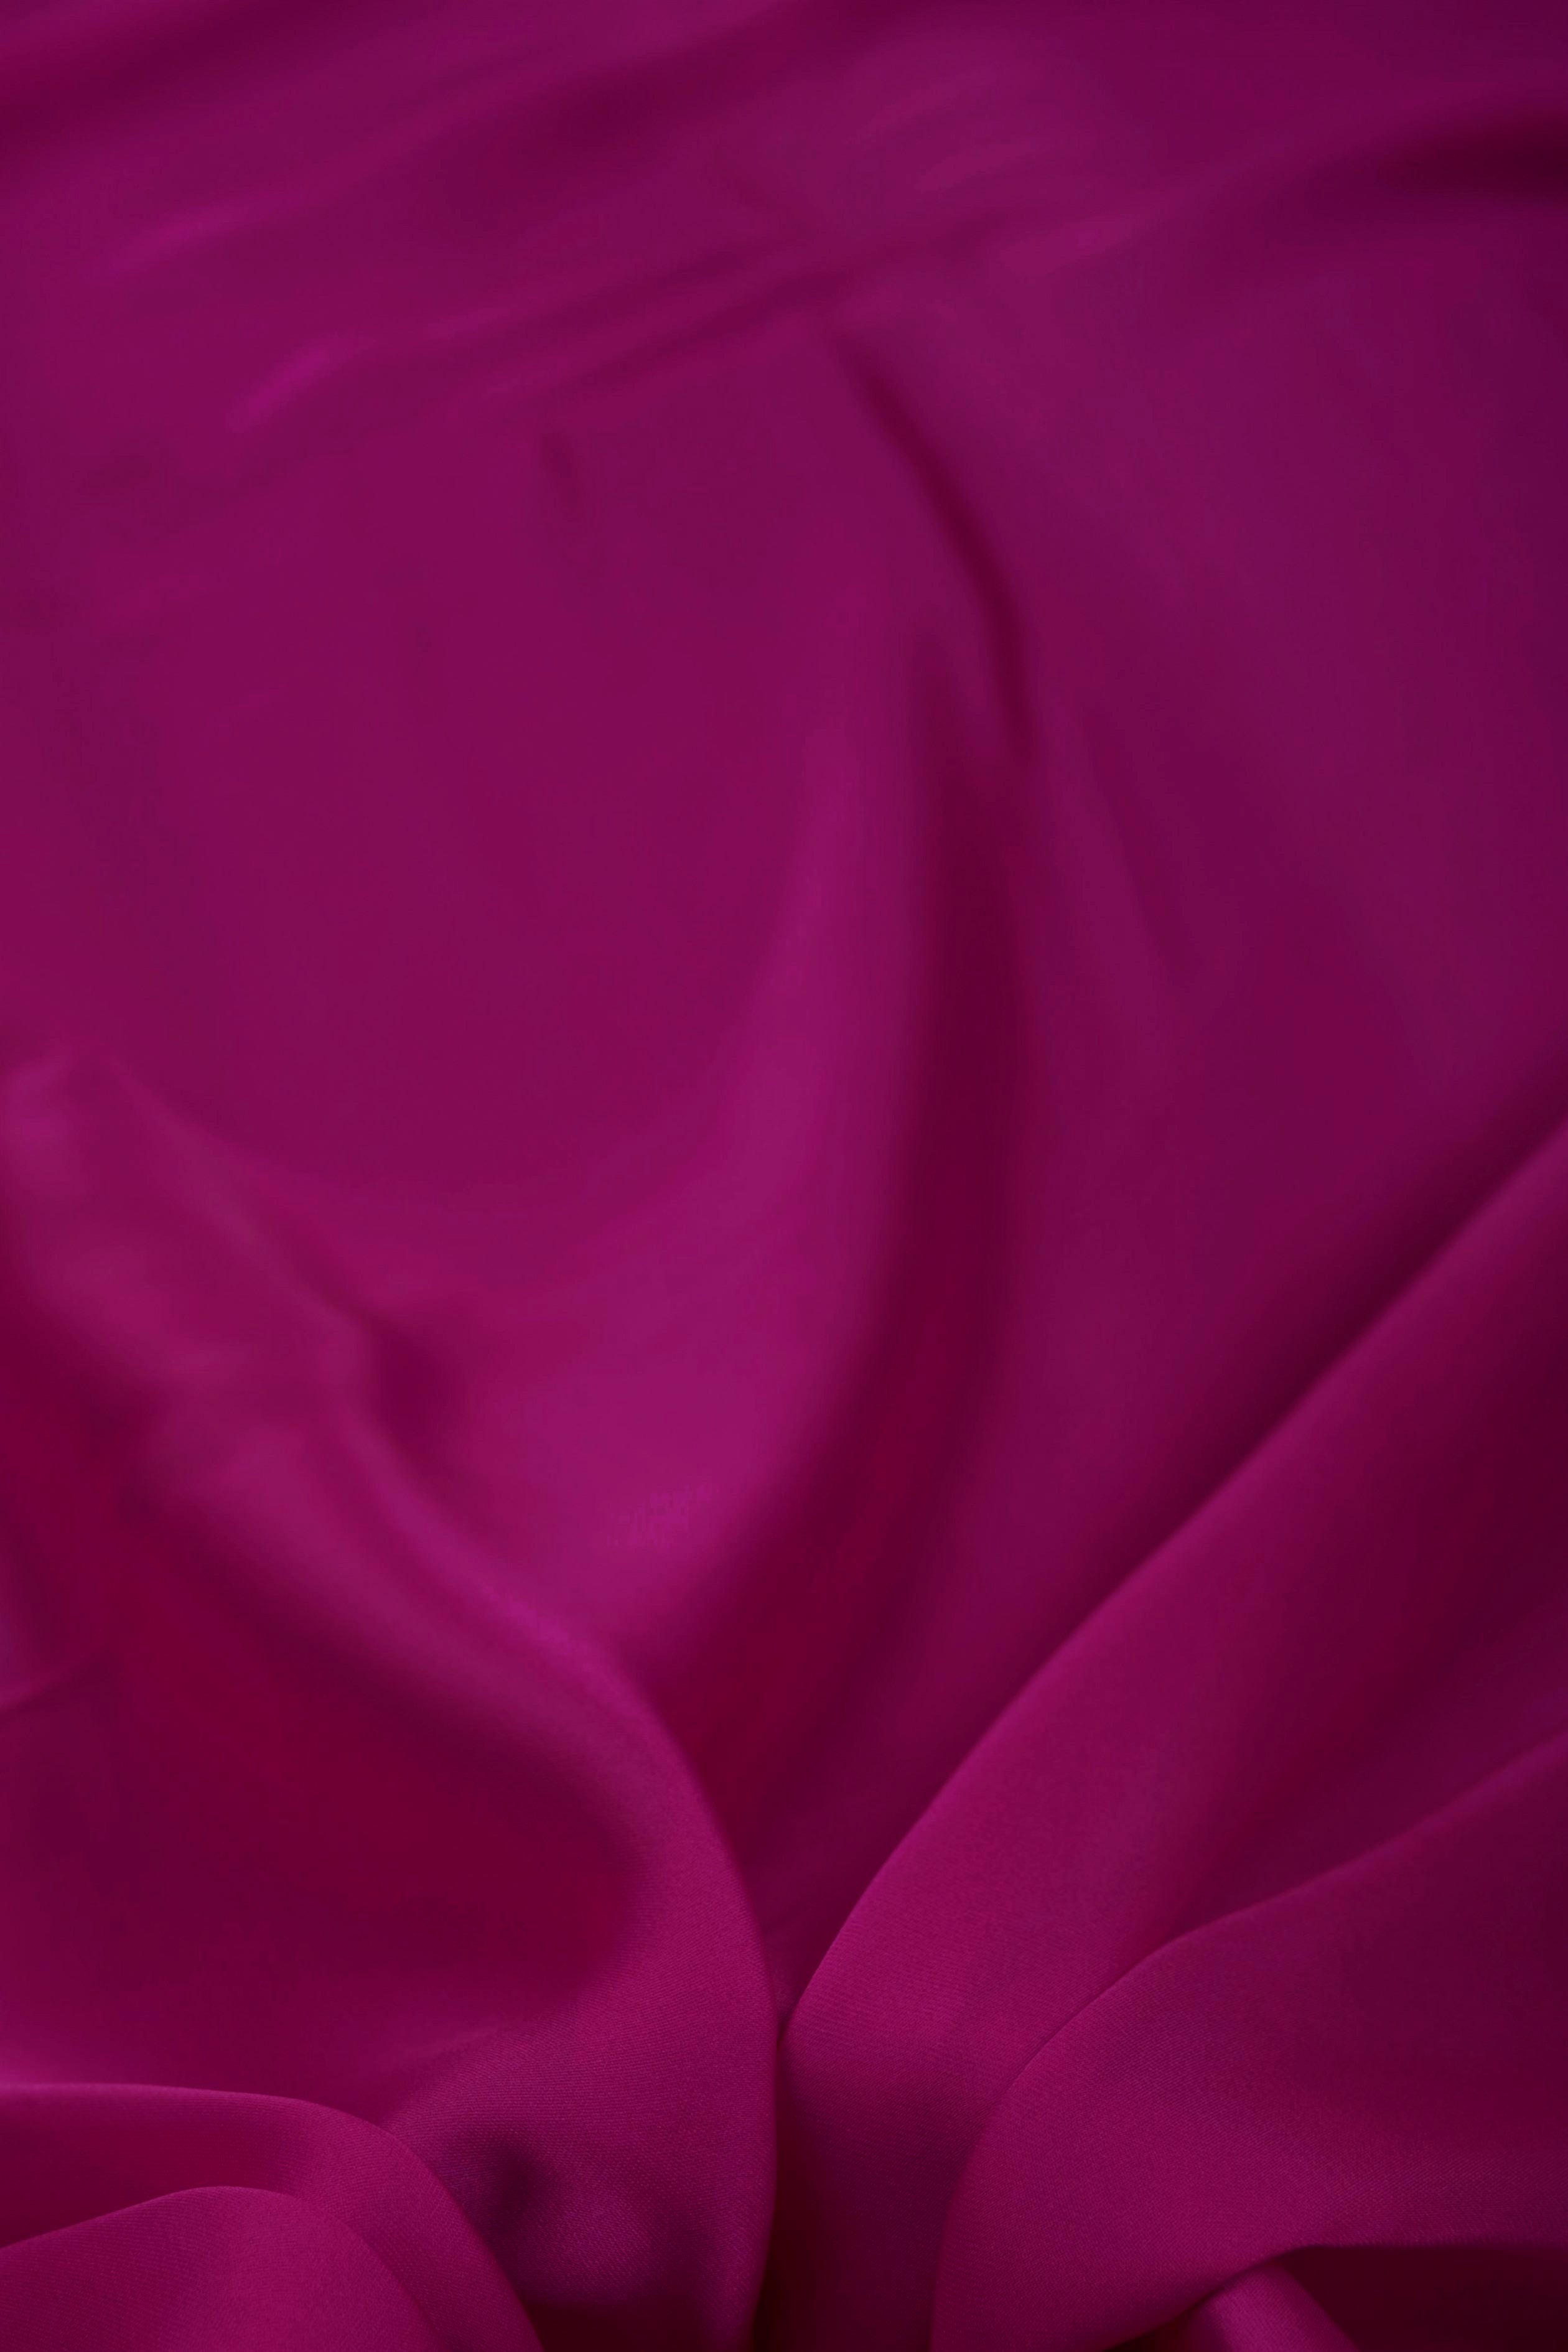 Cationic Wine Plain Dyed Satin Georgette Fabric